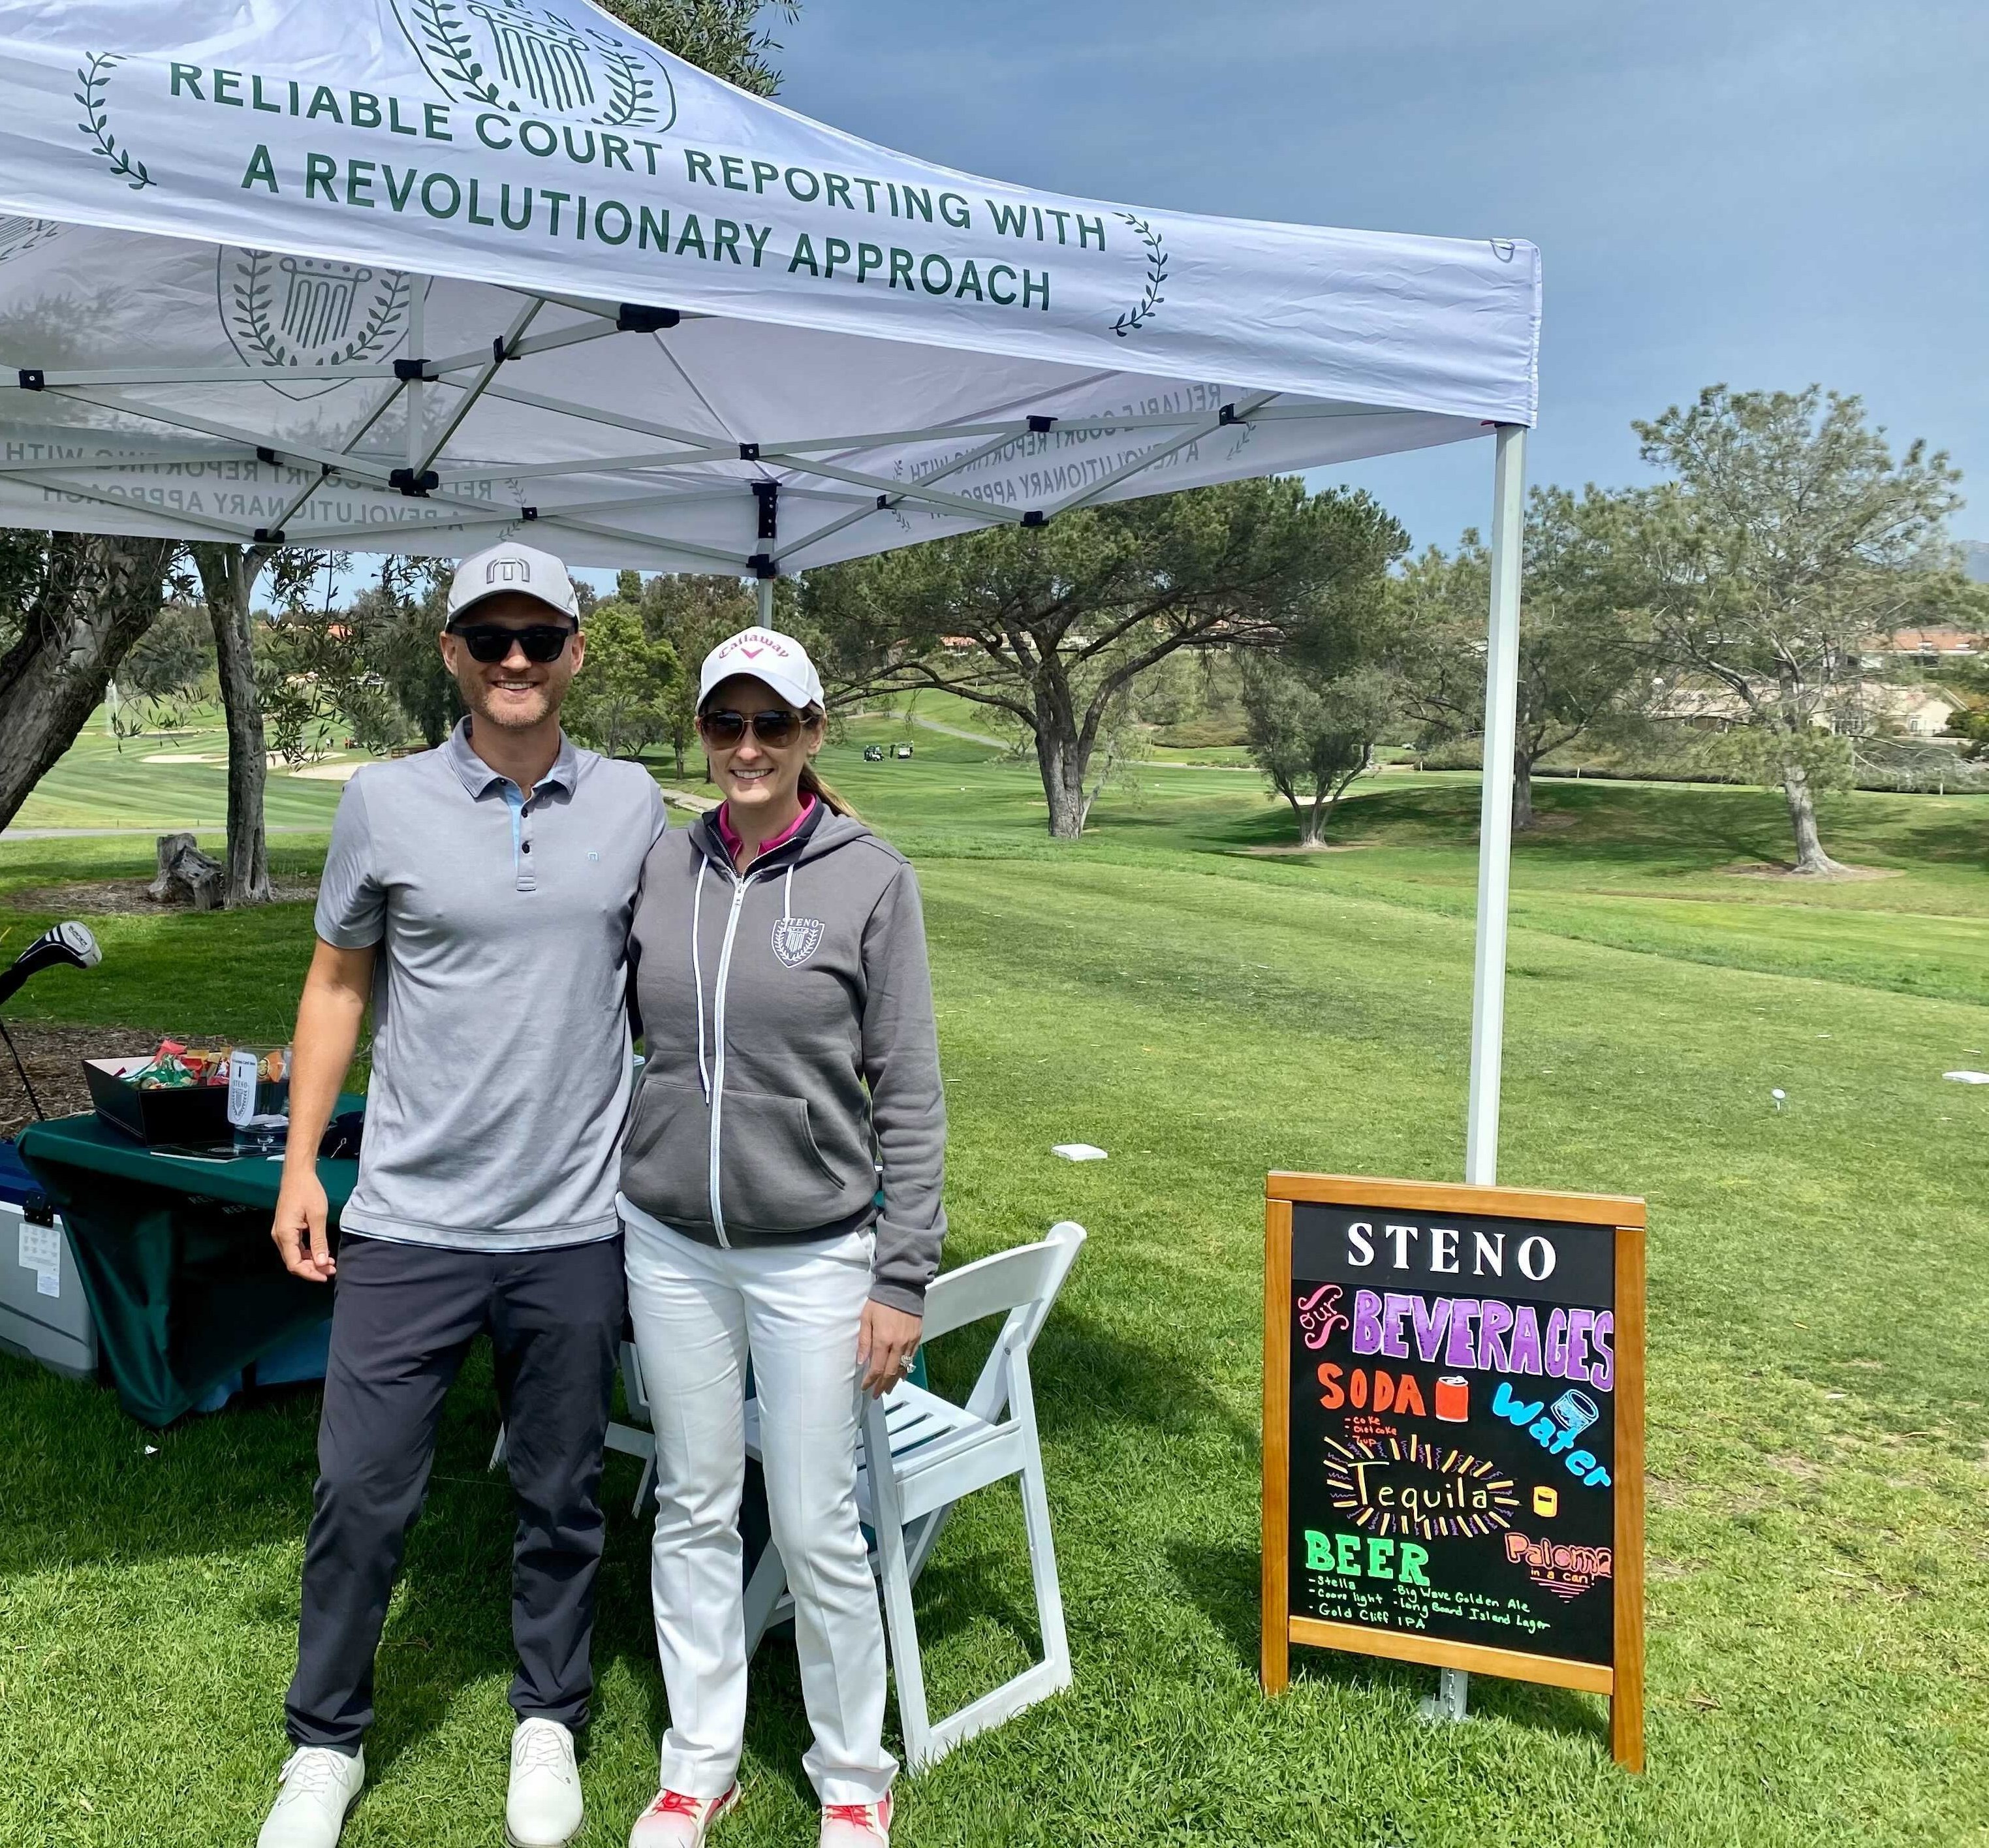 Connor and Carmela stand in front of a Steno-branded tend on a golf course.